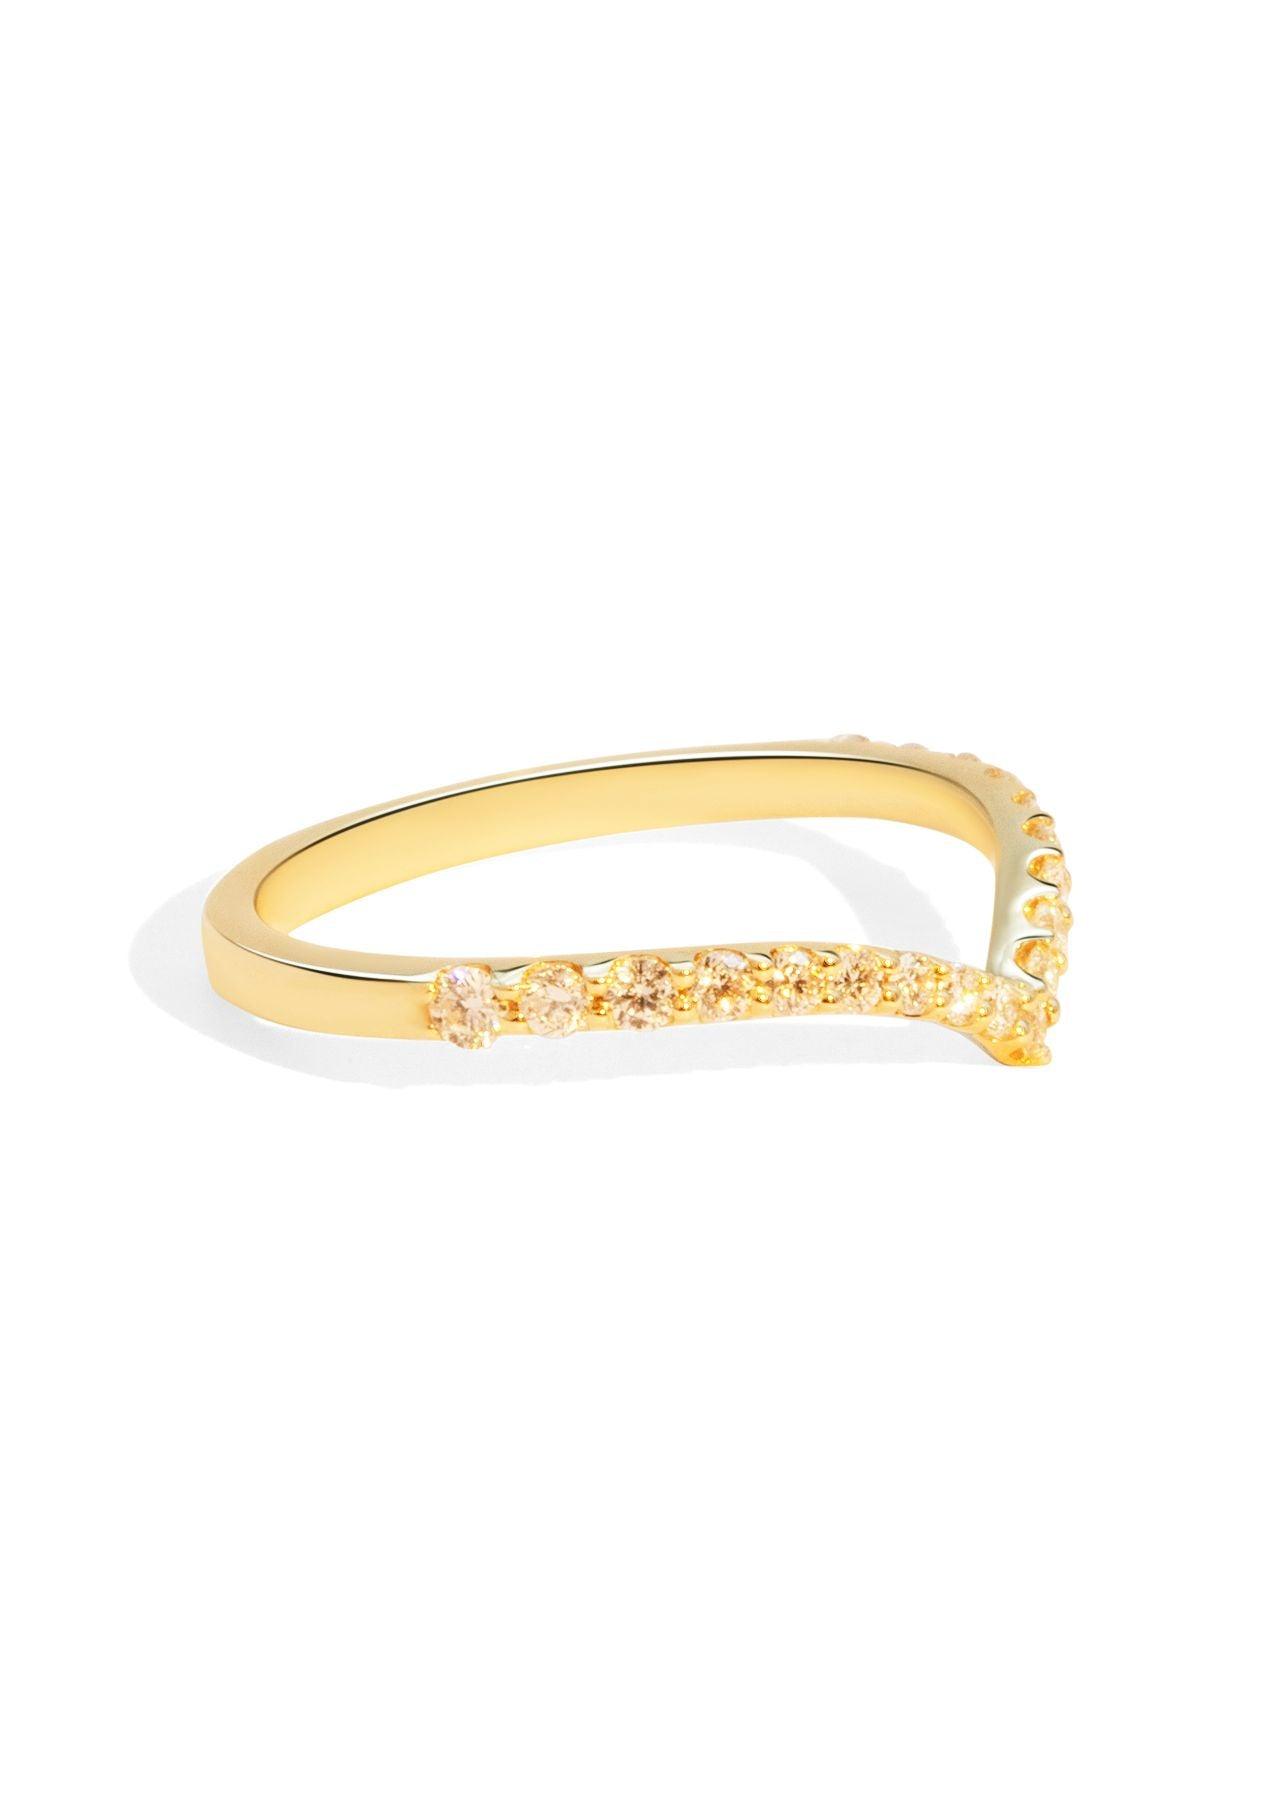 The Allude Yellow Gold Diamond Band